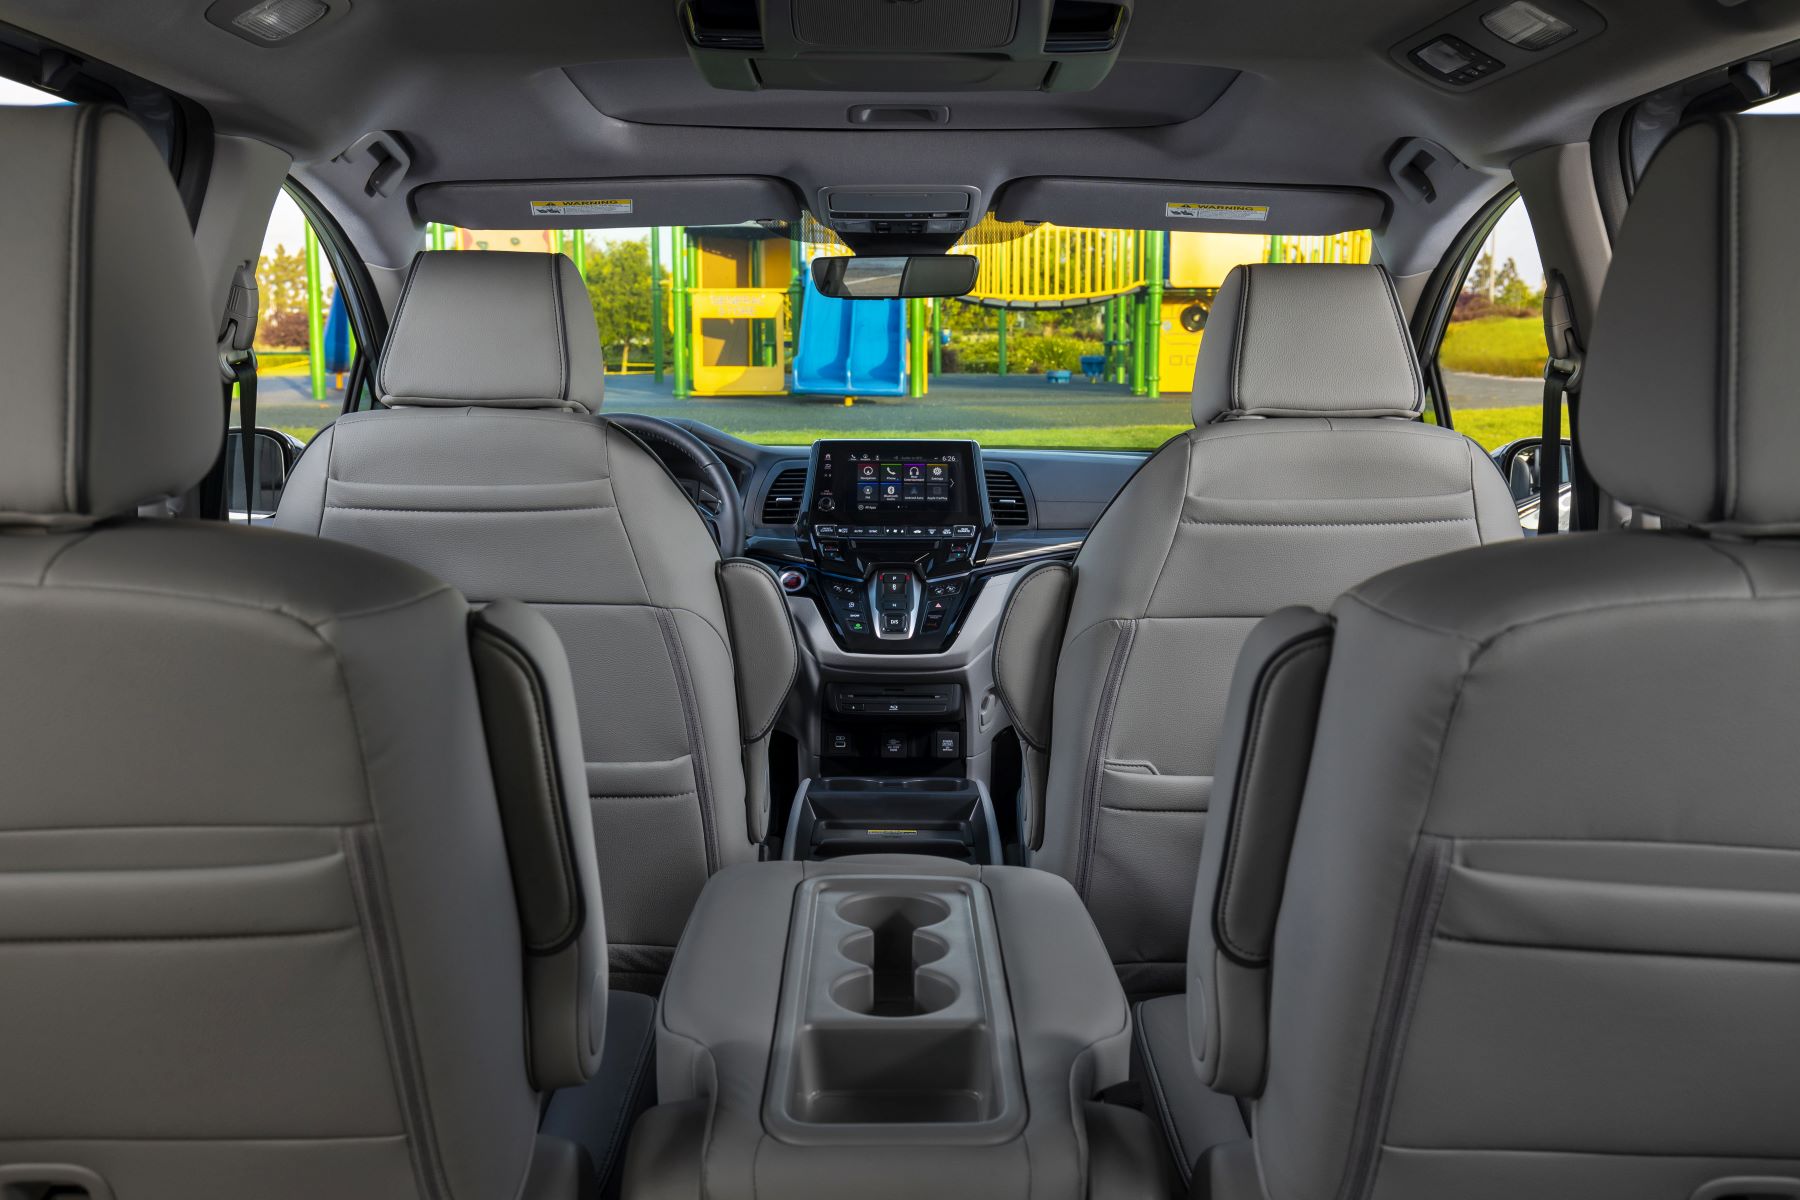 The cabin interior and seating layout of the 2022 Honda Odyssey minivan